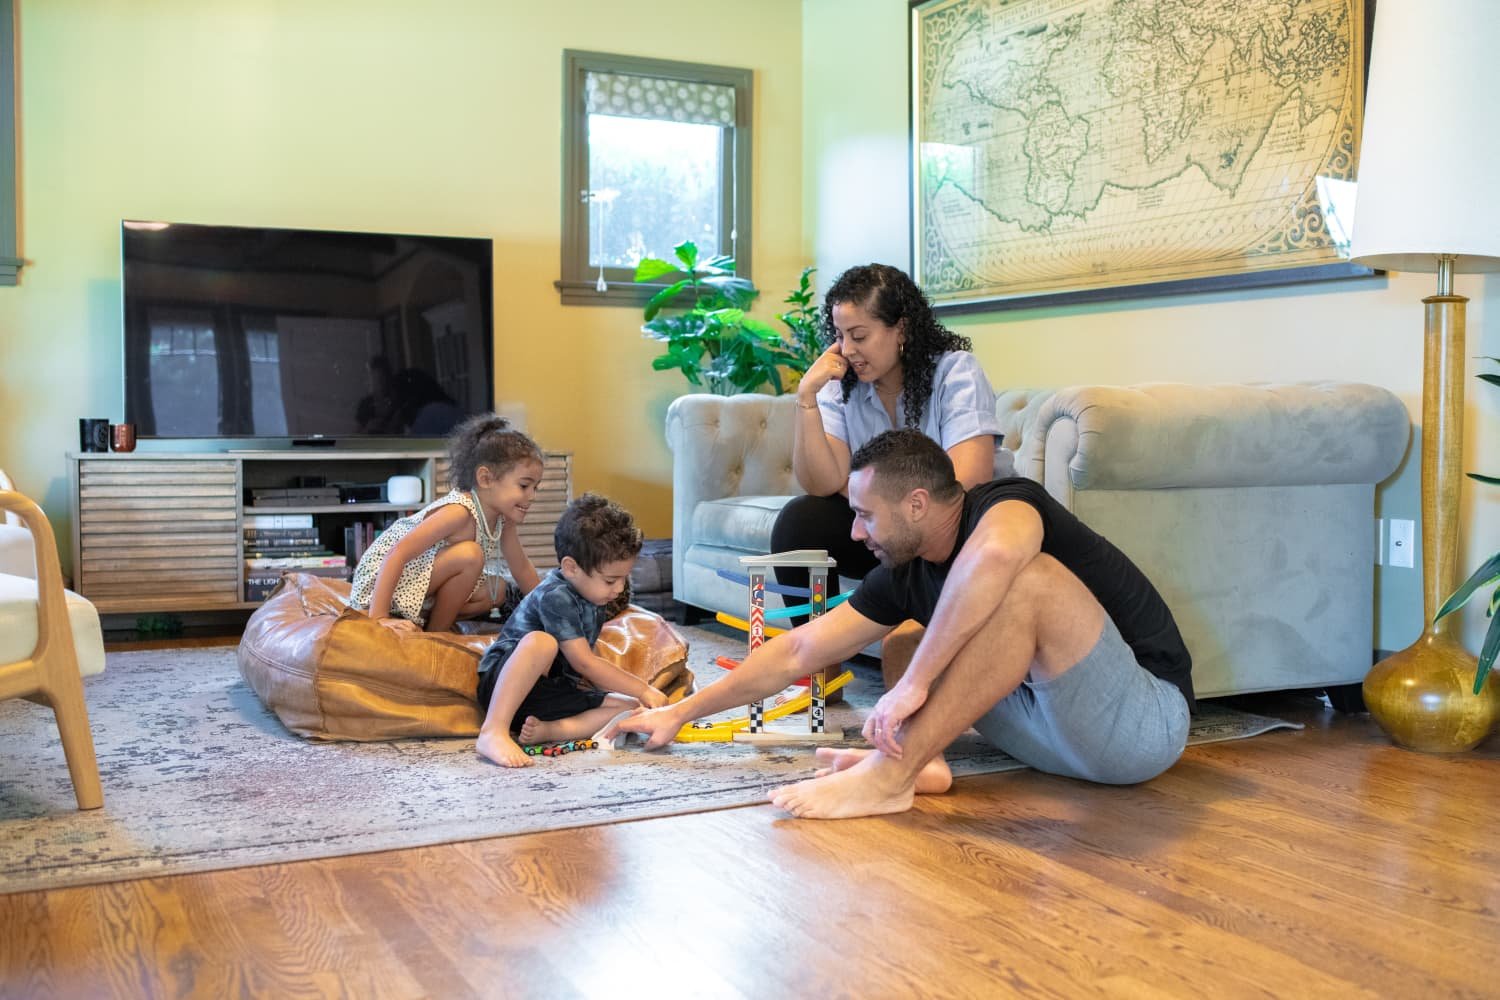 An Epidemiologist and Her Family Made a Temporary Home in a 1,600-Square-Foot Craftsman Bungalow